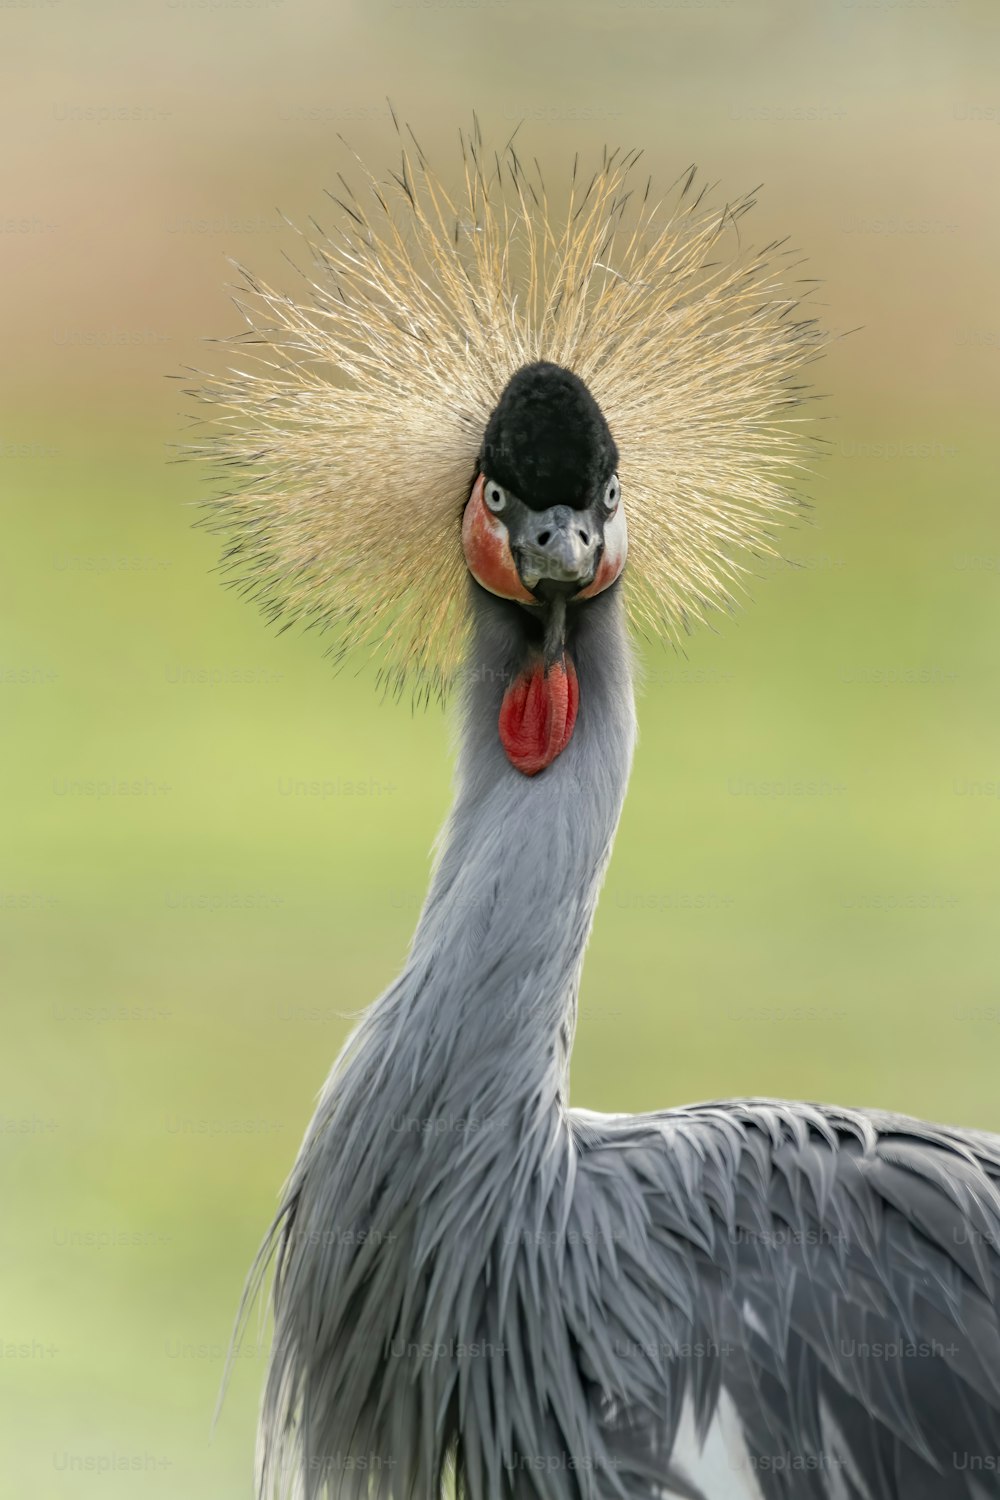 Portrait of a beautiful Black crowned crane, or Black Crested Crane (Balearica pavonina) close-up profile. National bird of Nigeria. Green background.